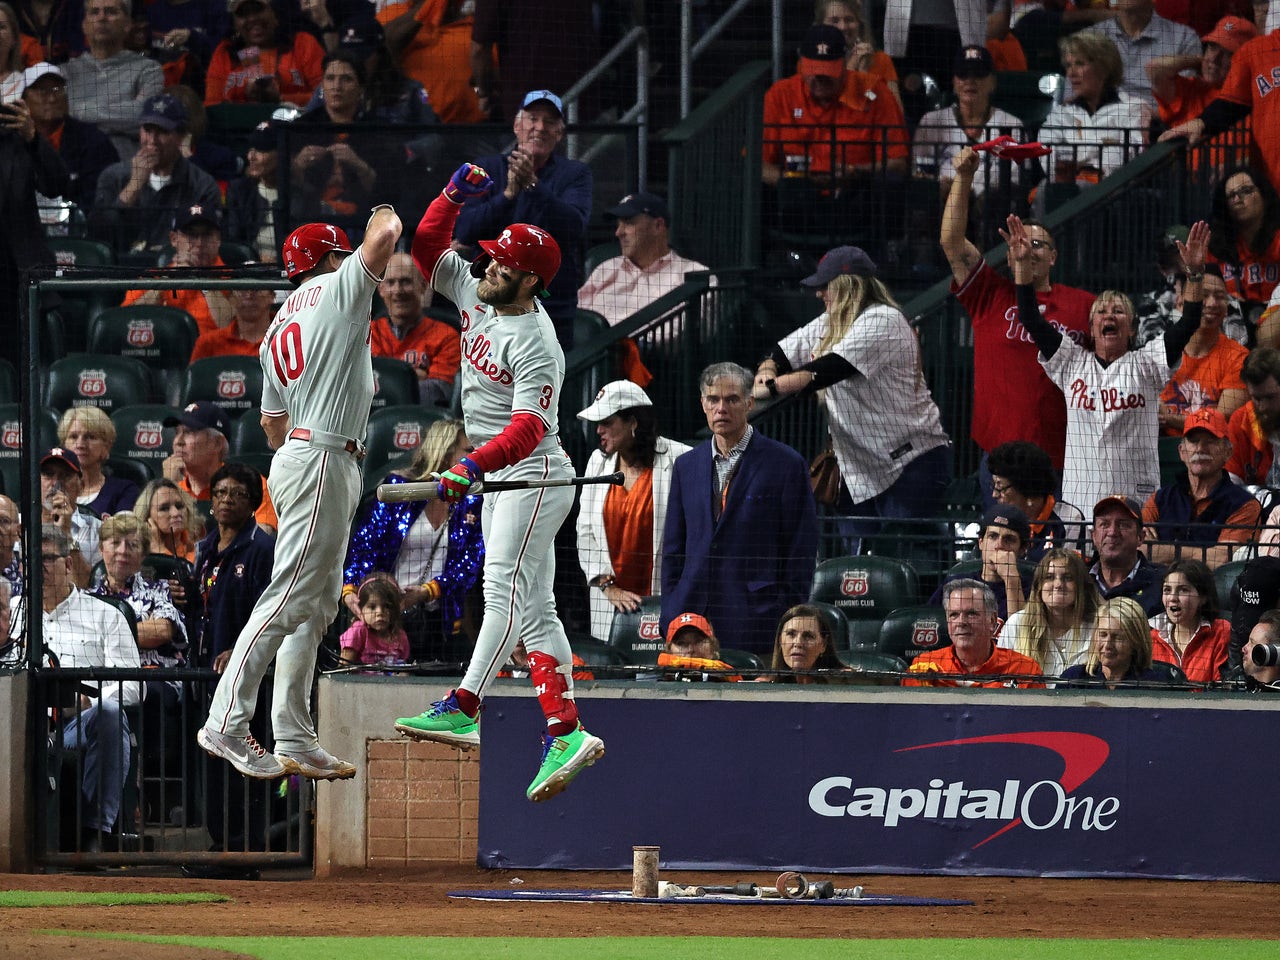 Phillies win Game 1 in 10 after battling back from 5-0 deficit